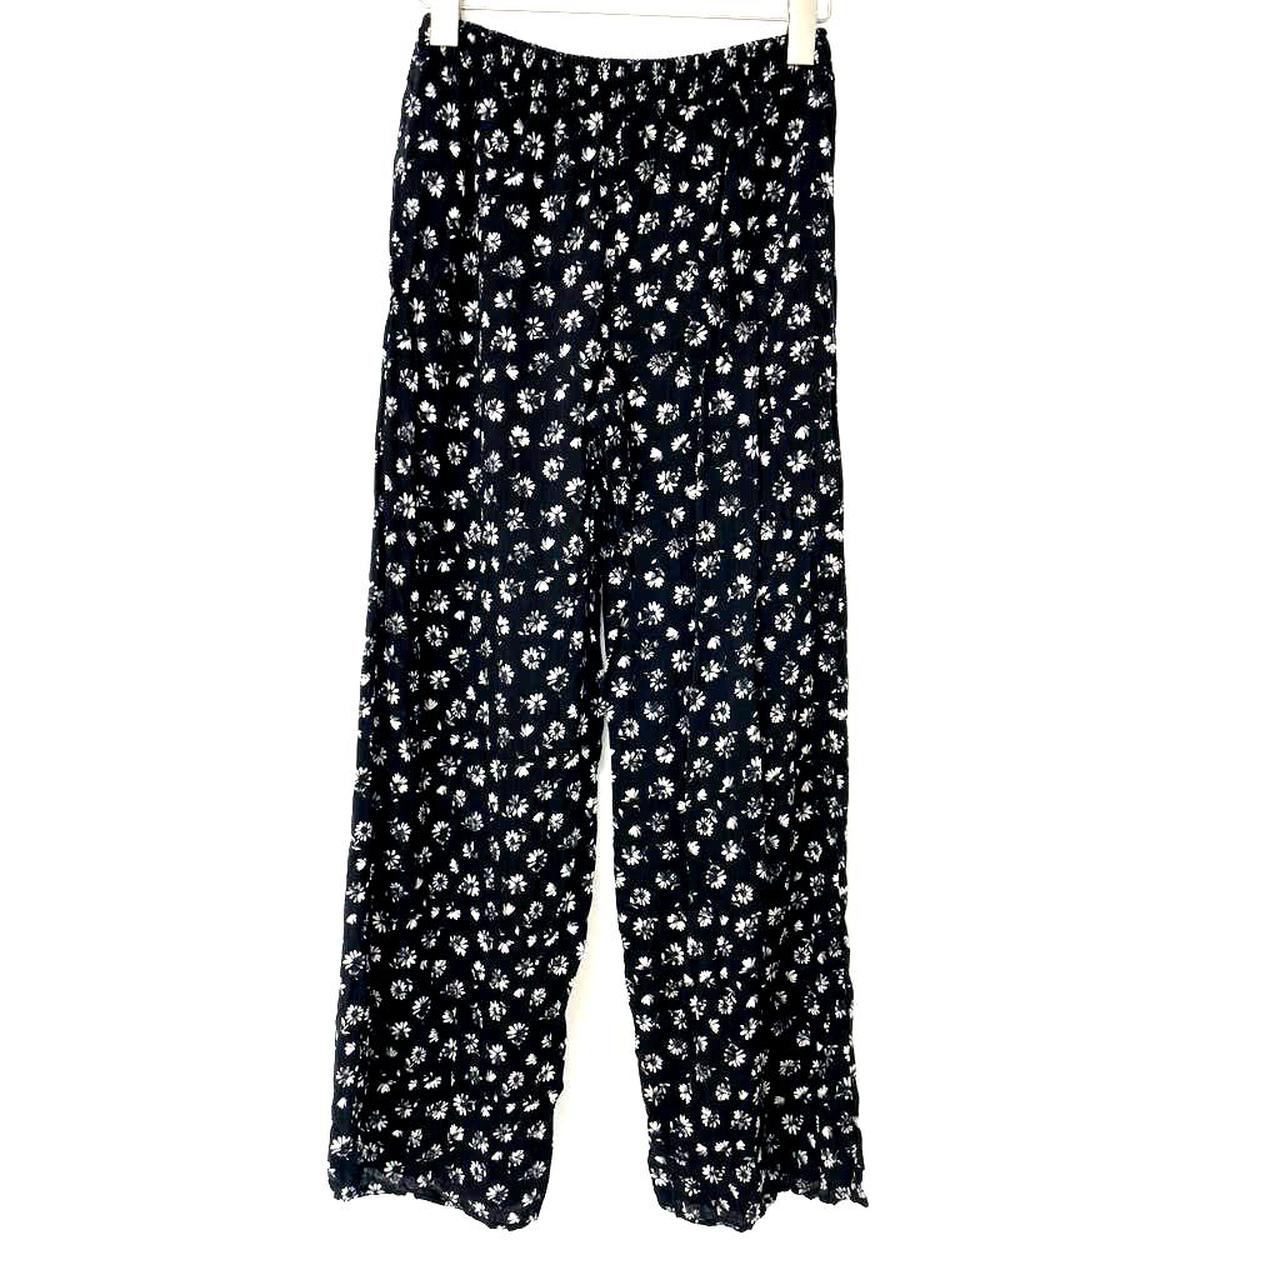 Black and white floral pants. Light weight... - Depop